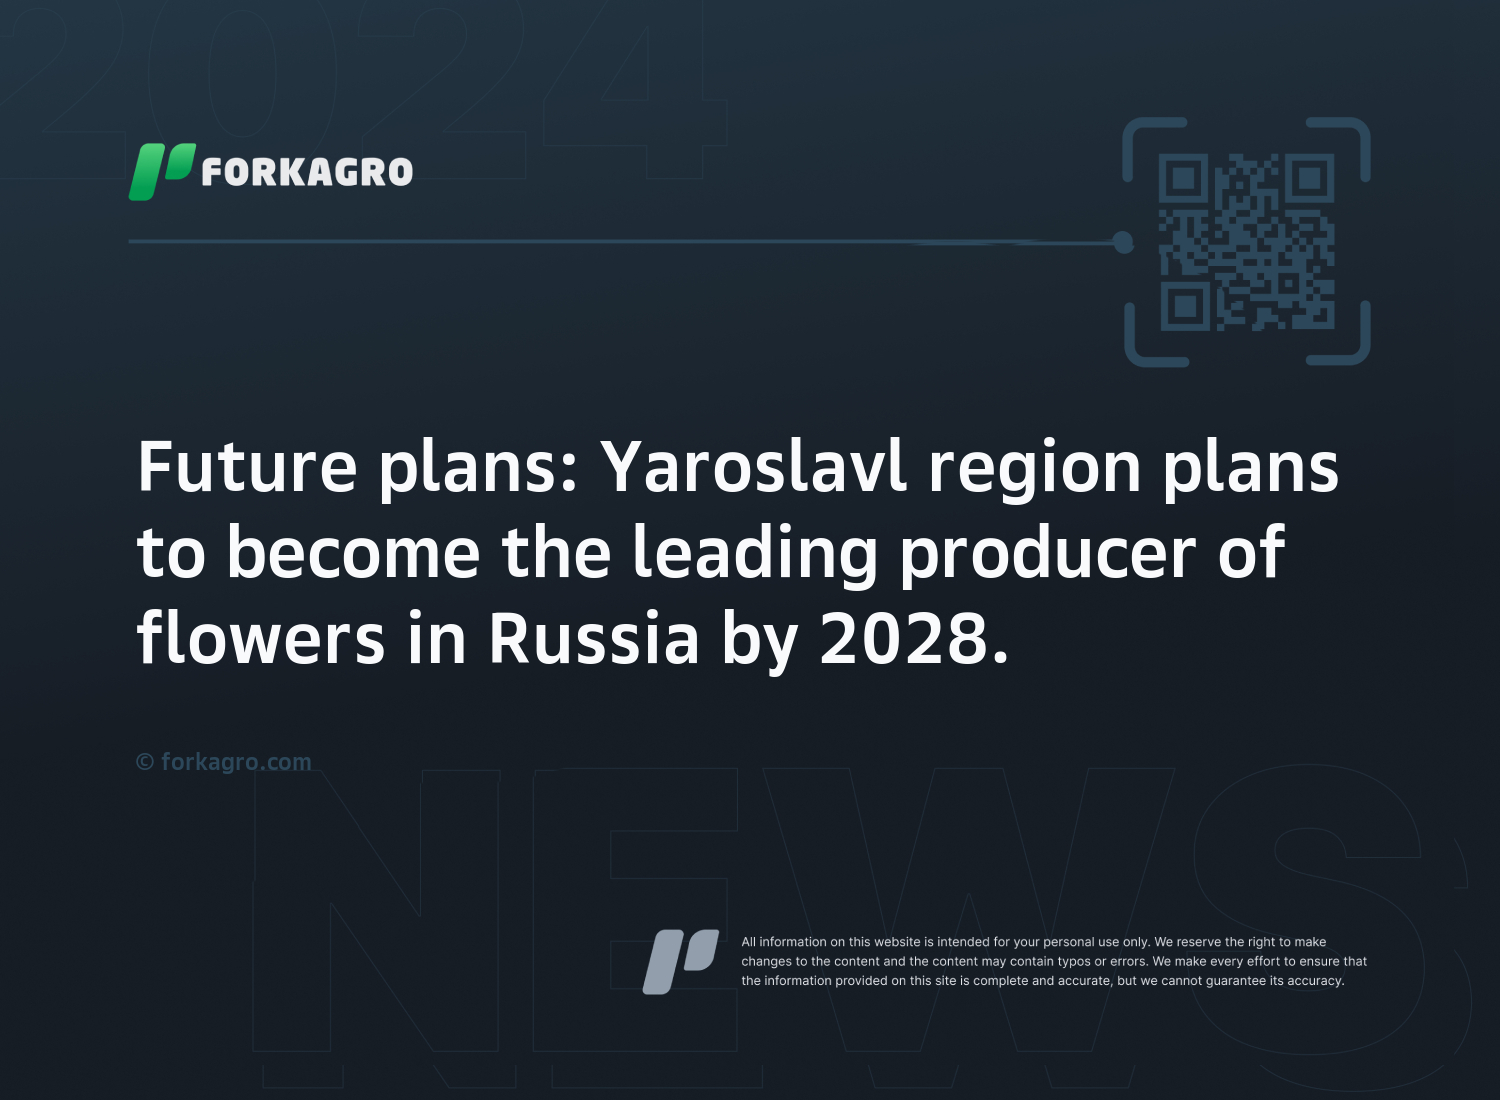 Future plans: Yaroslavl region plans to become the leading producer of flowers in Russia by 2028.